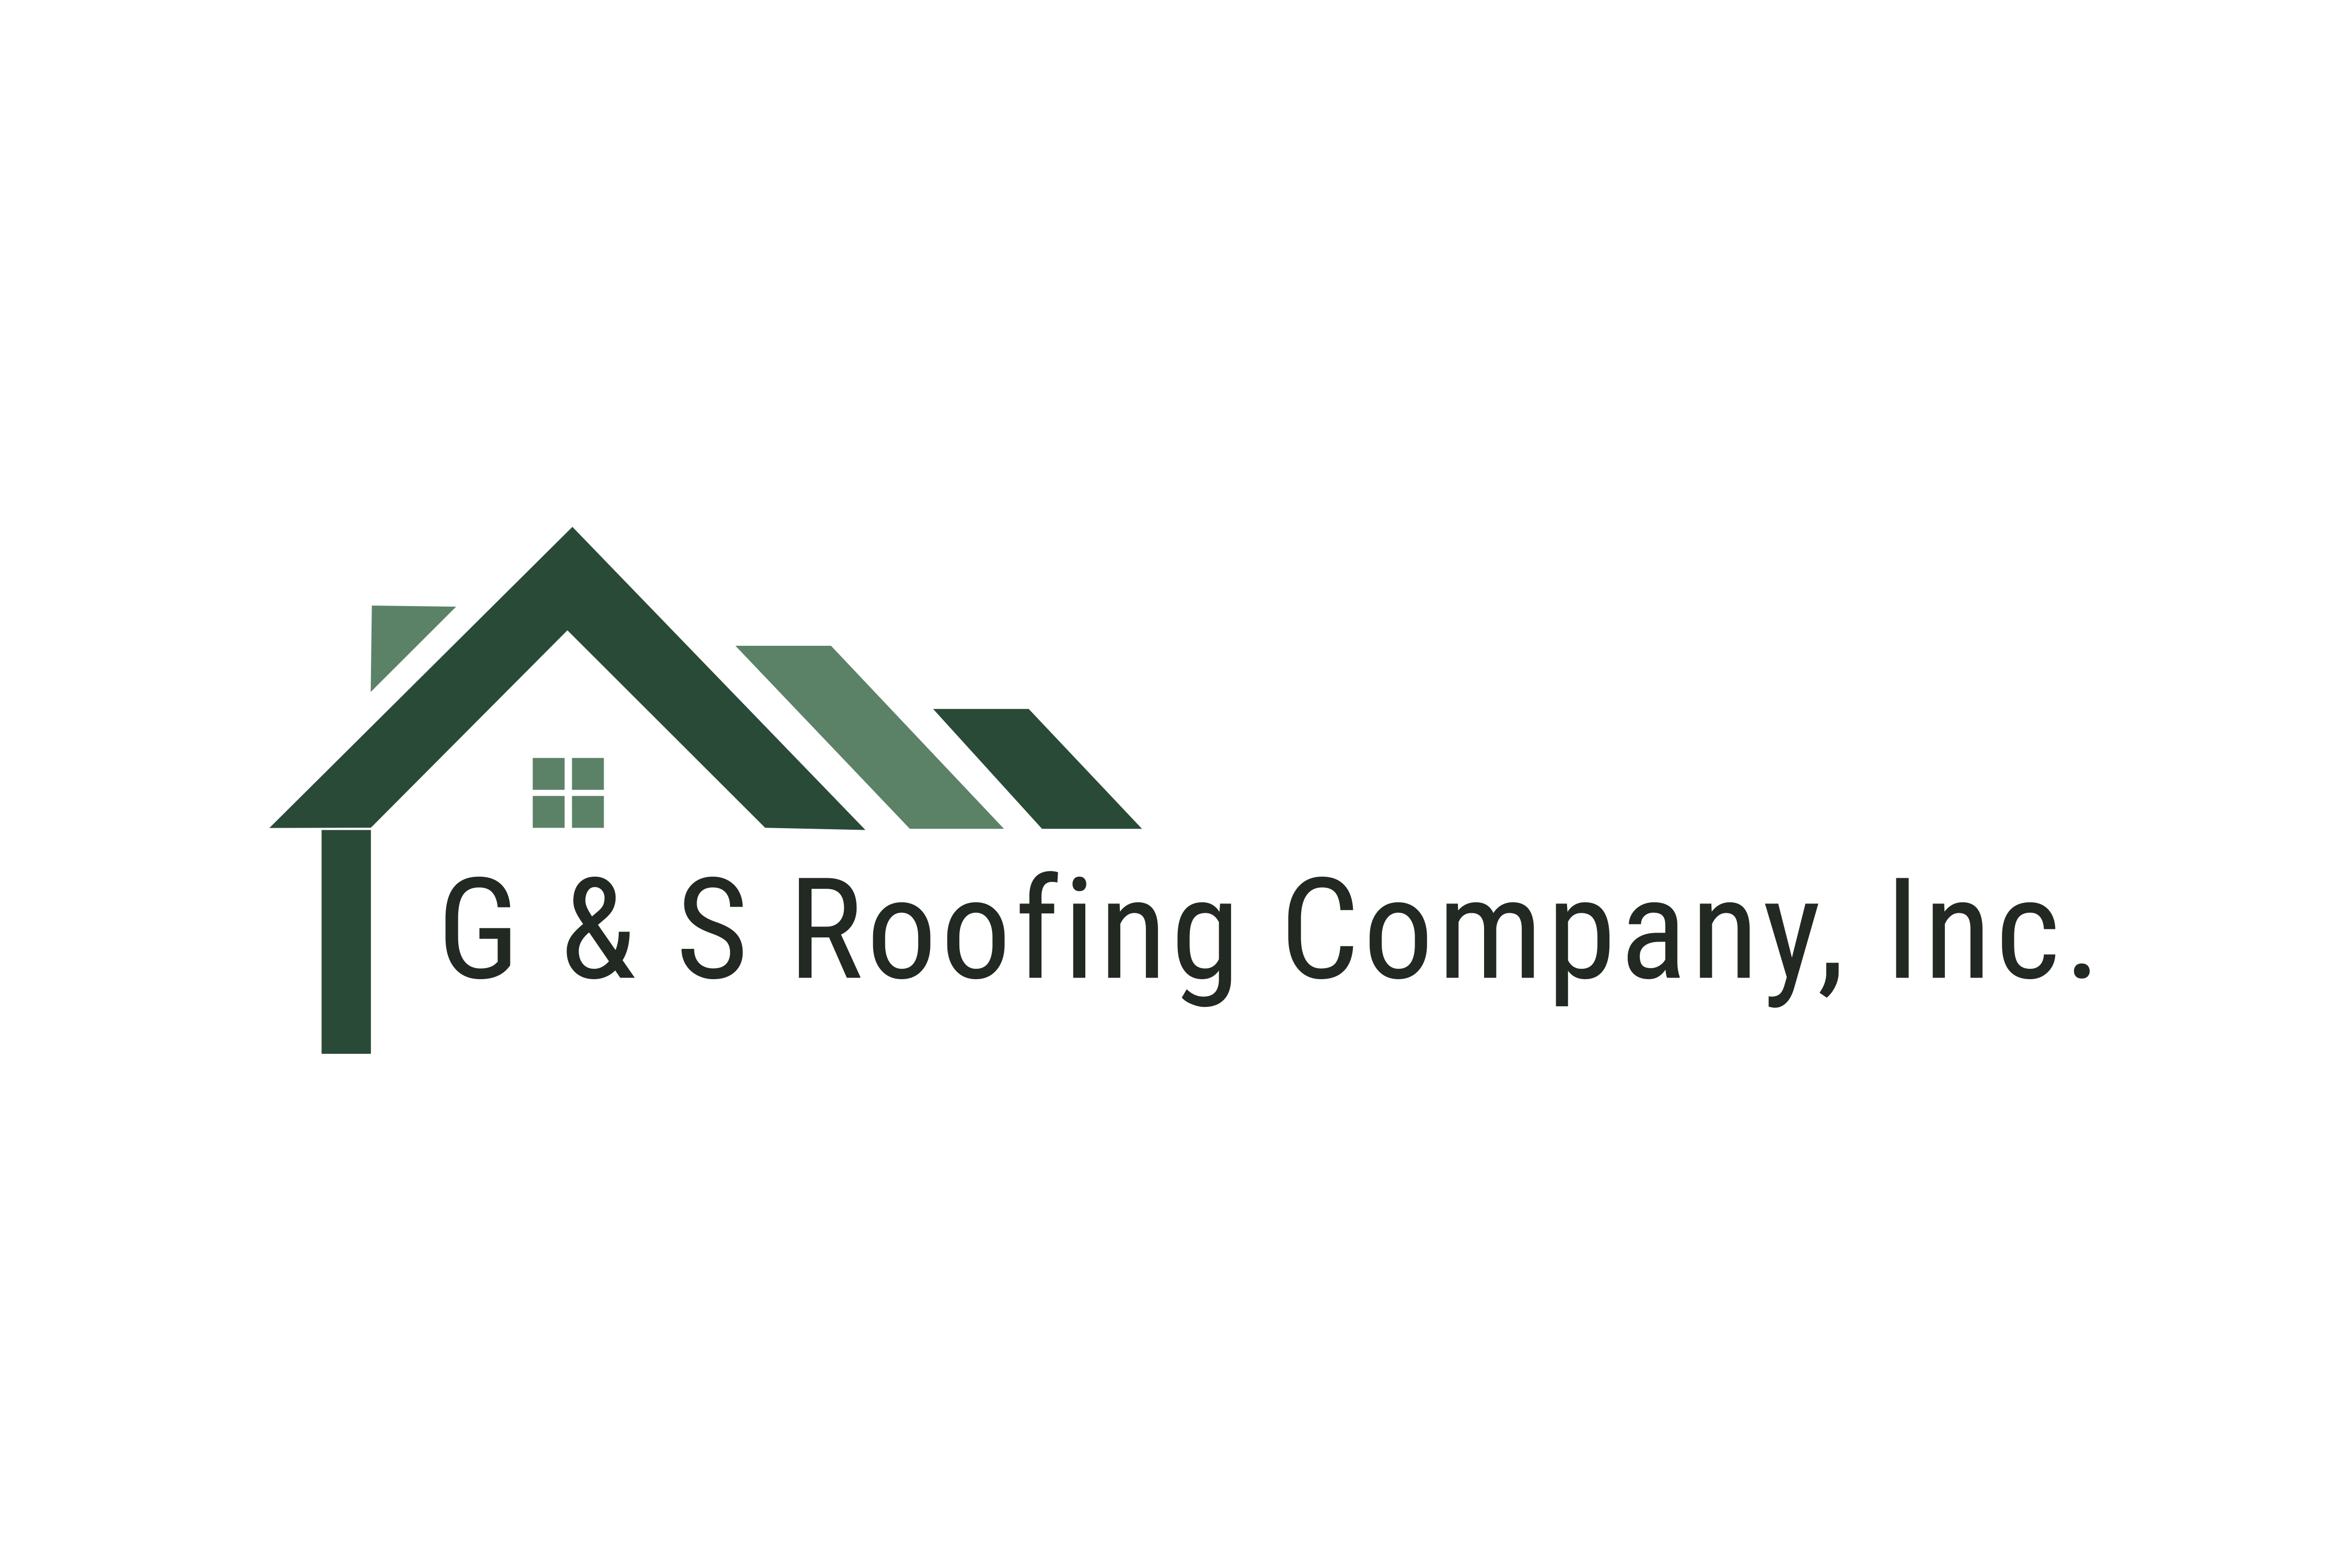 G & S Roofing Company Inc Logo